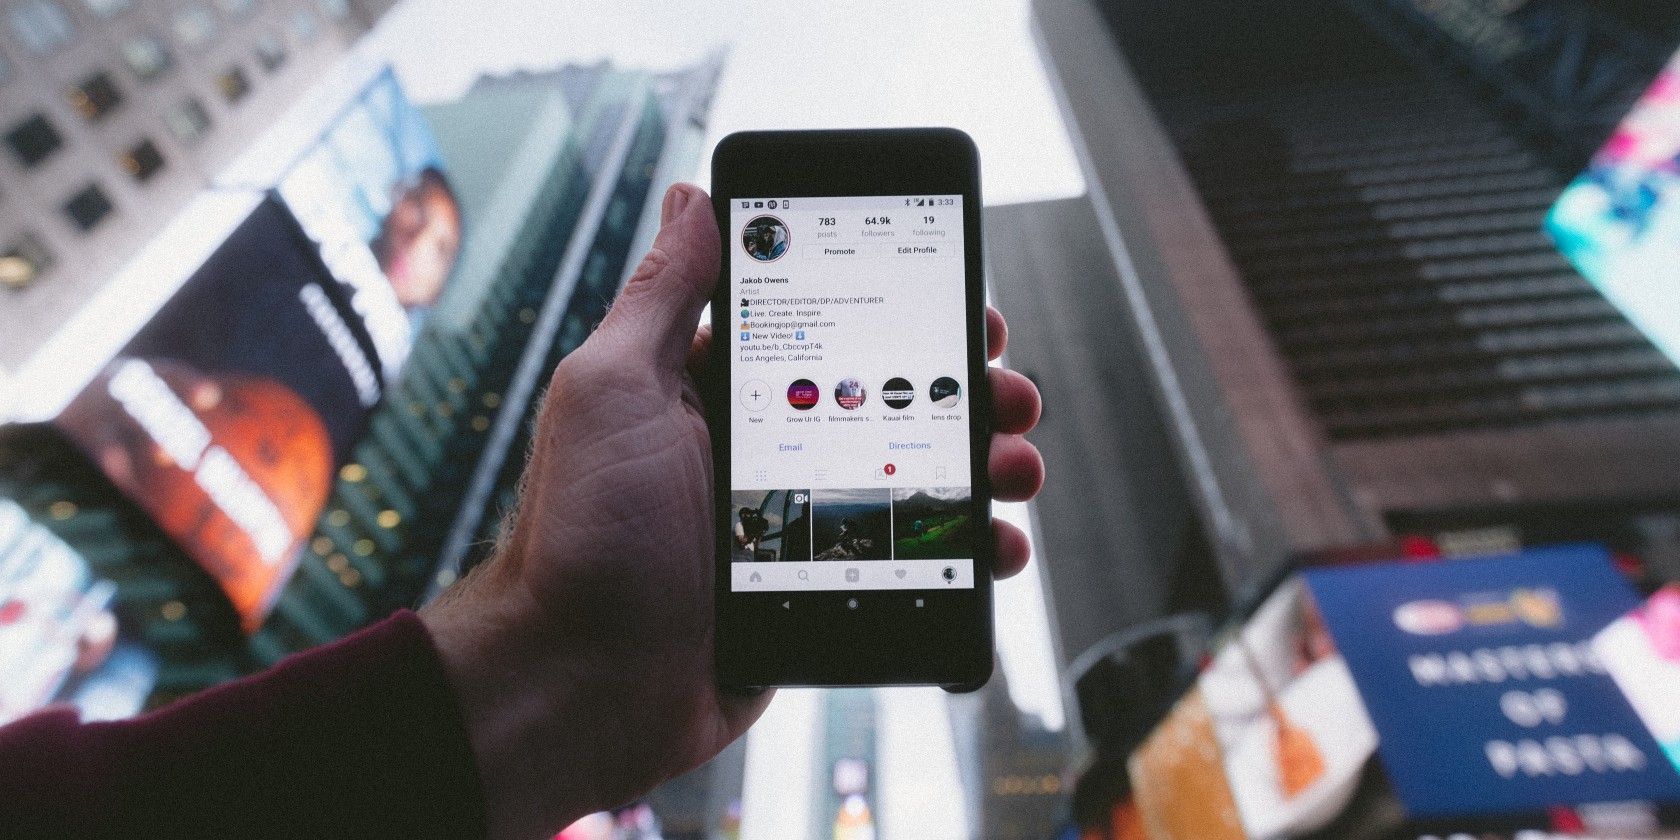 Instagram: Instagram introduces 'Following' and 'Favorites